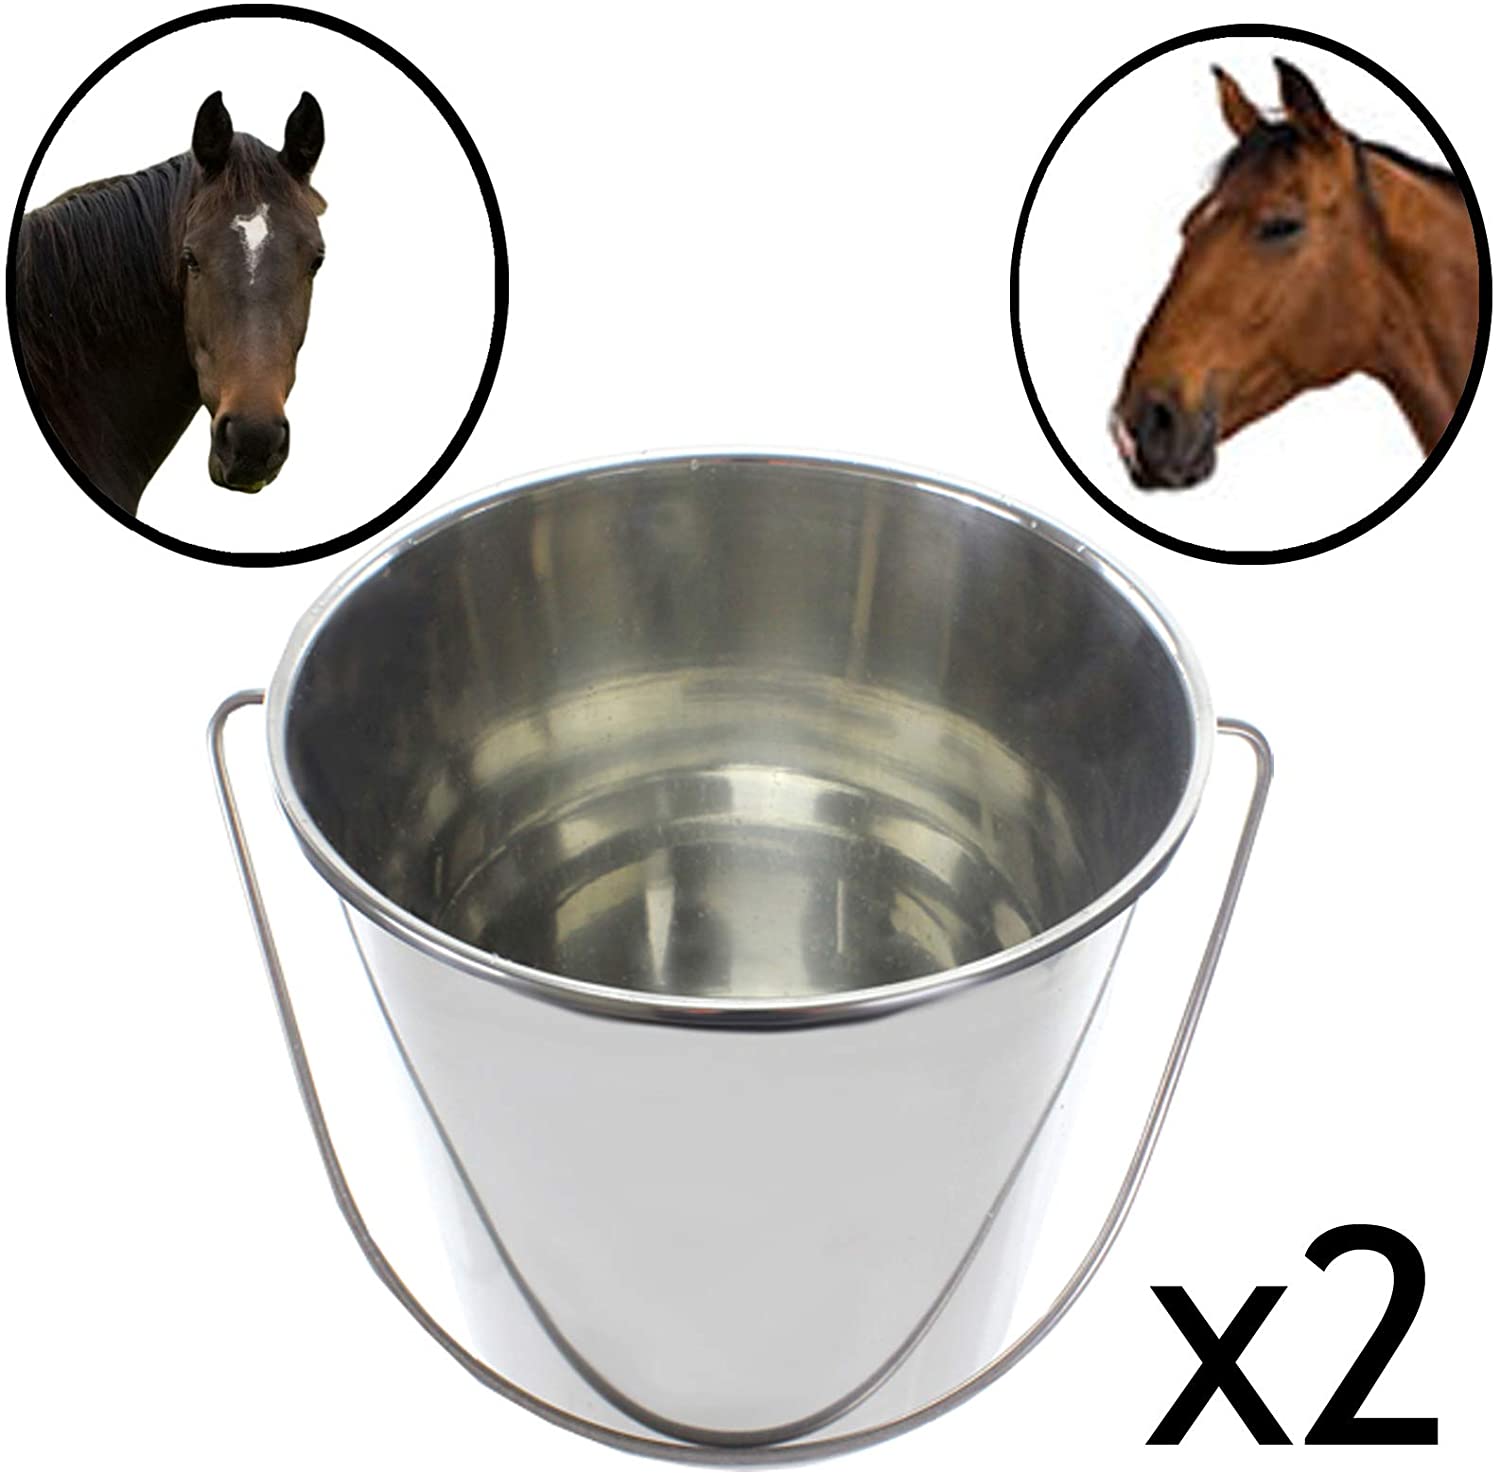 Watering Bucket, 2 x Buckets for Horse, Horses  Equestrian Stable